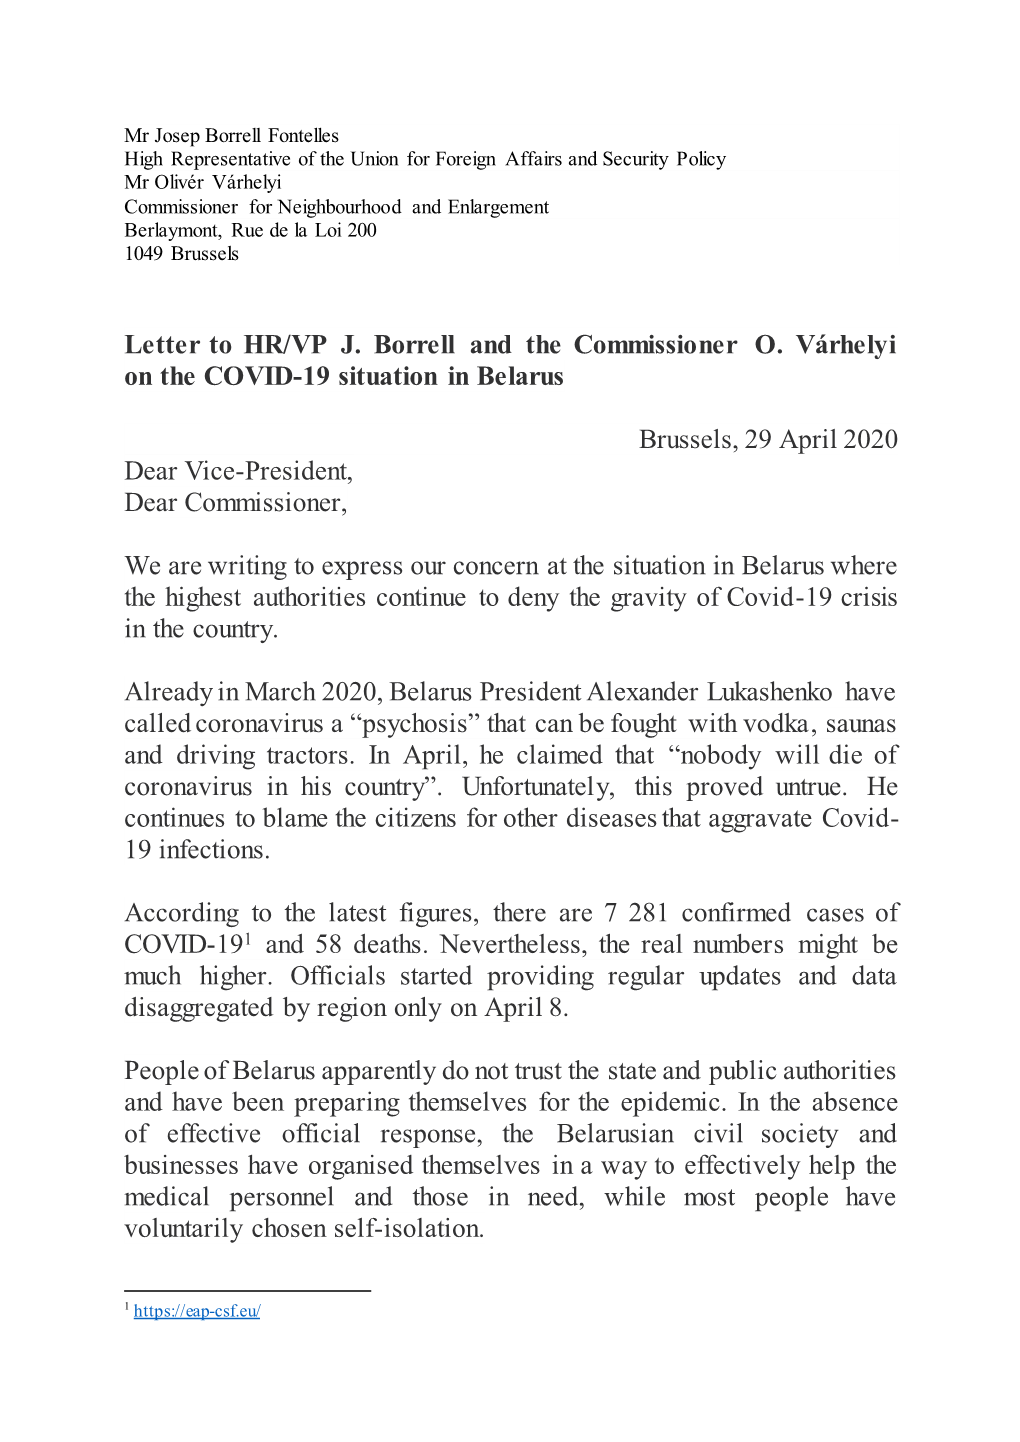 Letter to HR/VP J. Borrell and the Commissioner O. Várhelyi on the COVID-19 Situation in Belarus